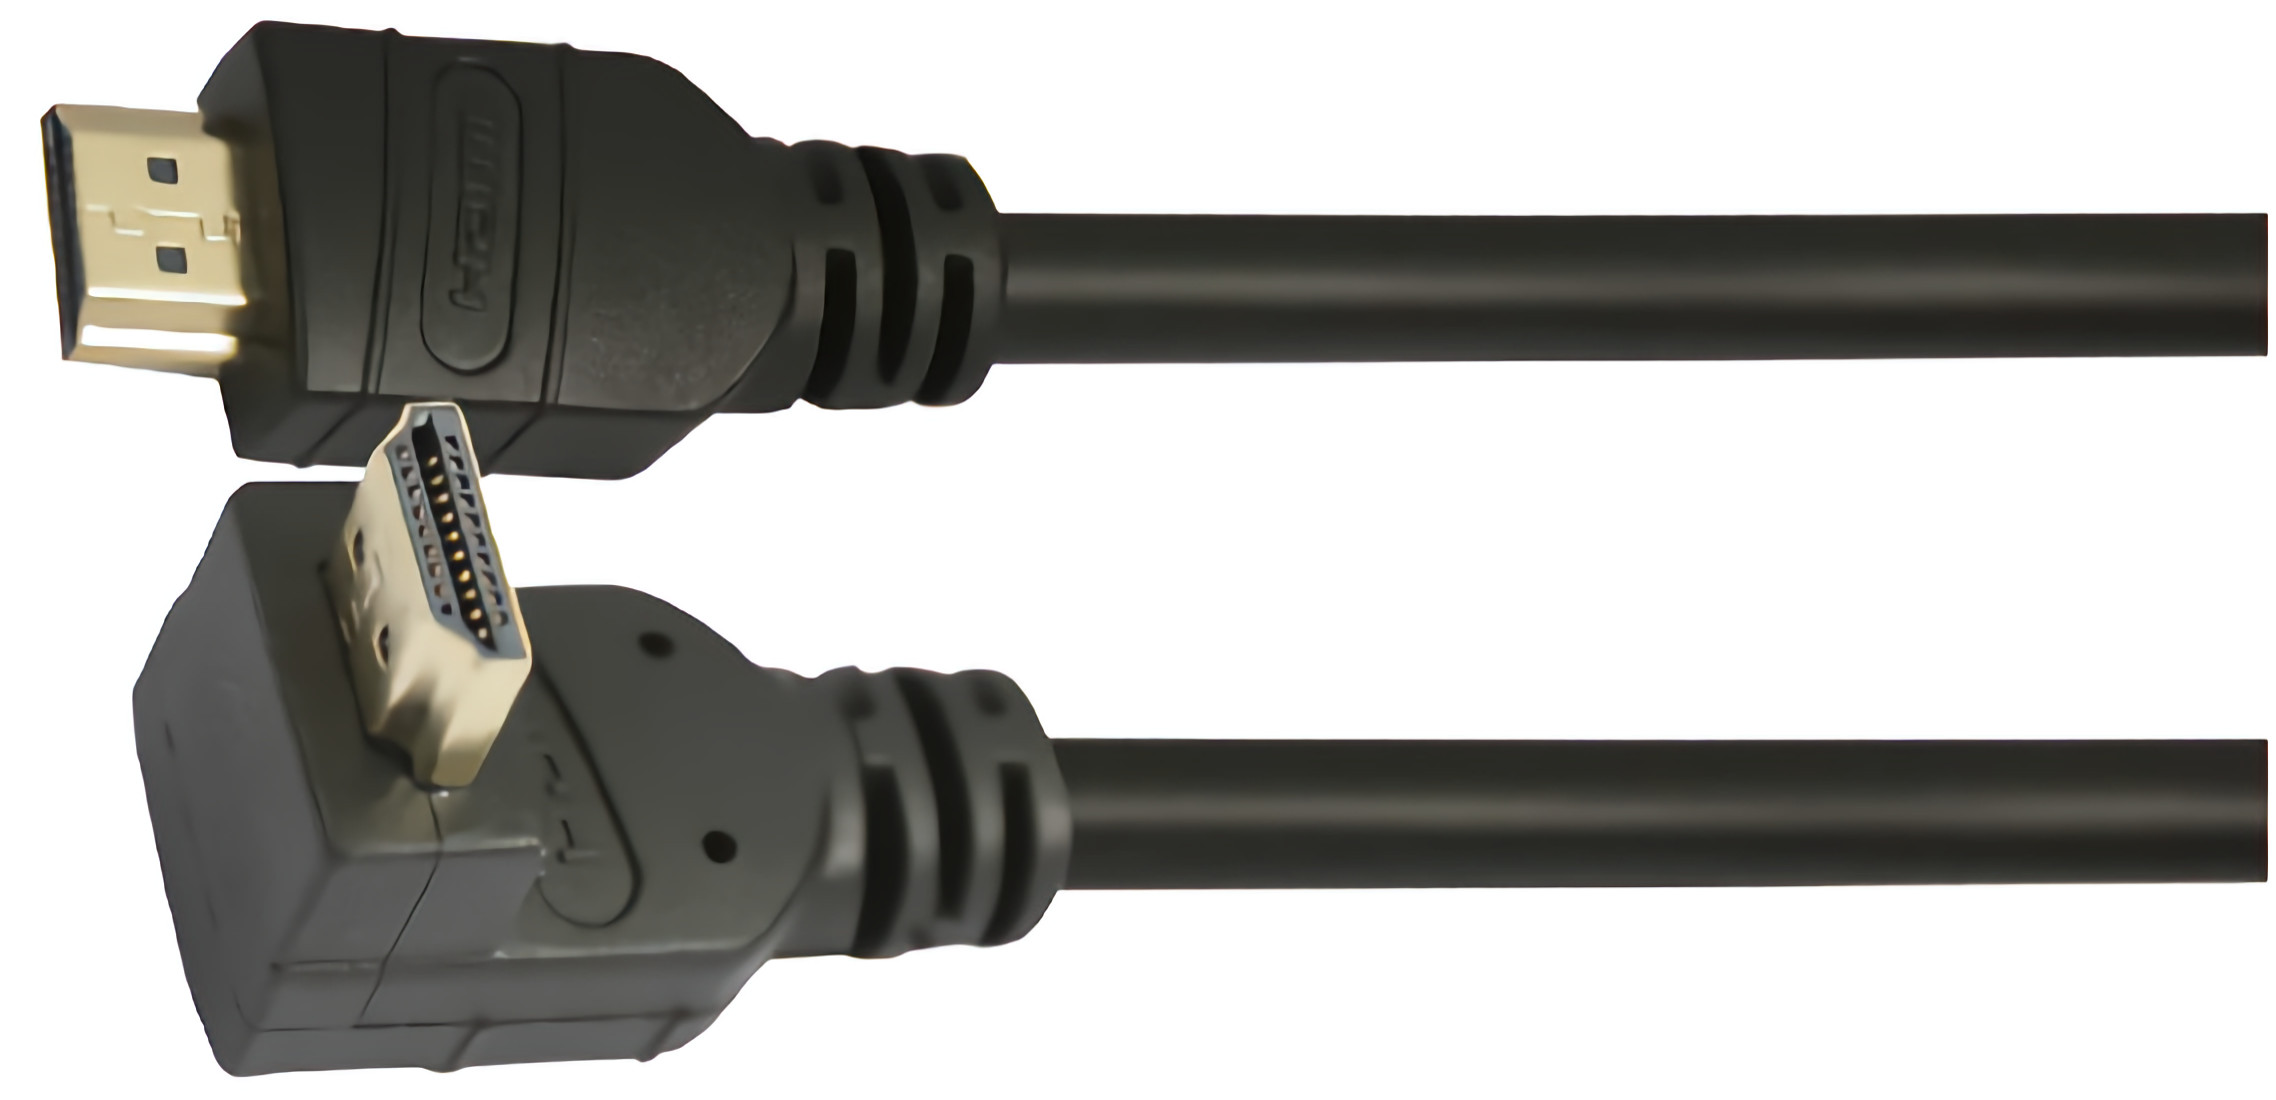 Are you in the market for a high-quality HDMI 19 pin to 19 pin cable? Look no further than the CB-TNC702PBB1030. This 3ft (91.44 cm) cable is the perfect solution to all your HDMI-connectivity needs